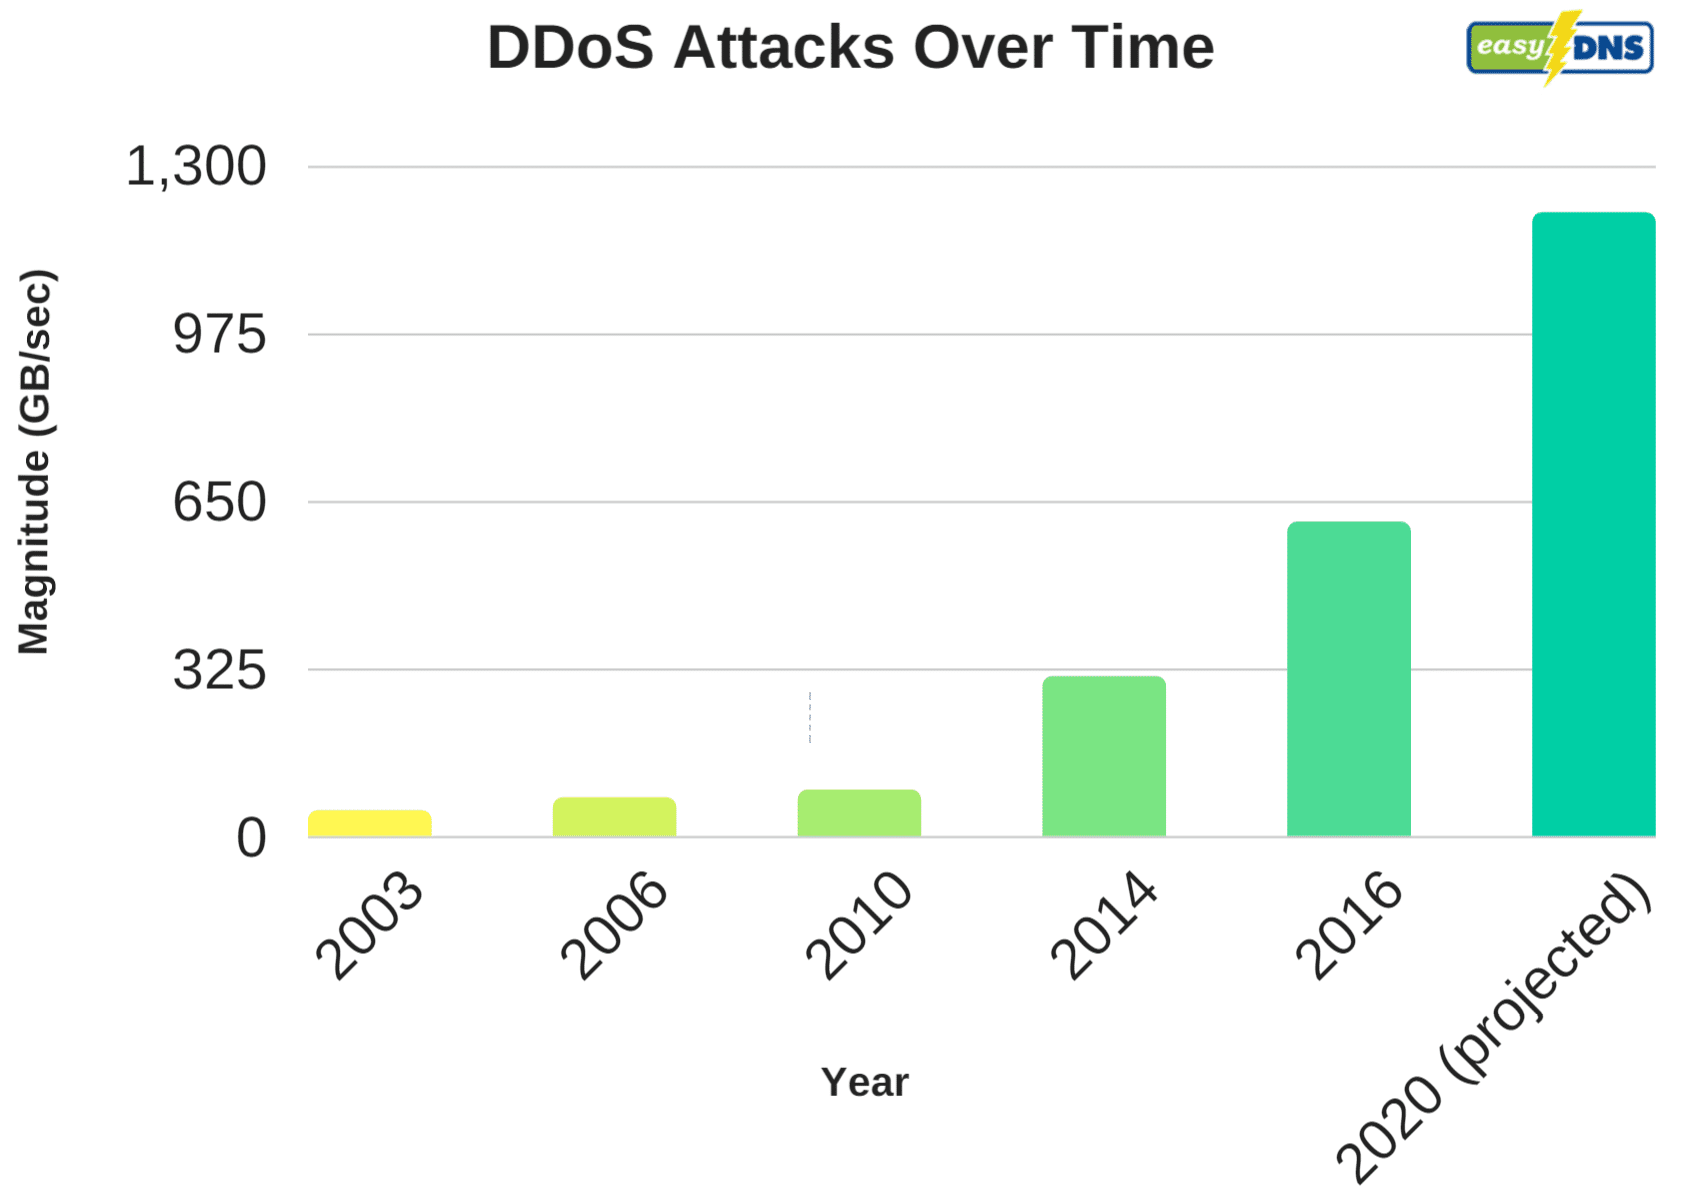 DDoS attacks over time